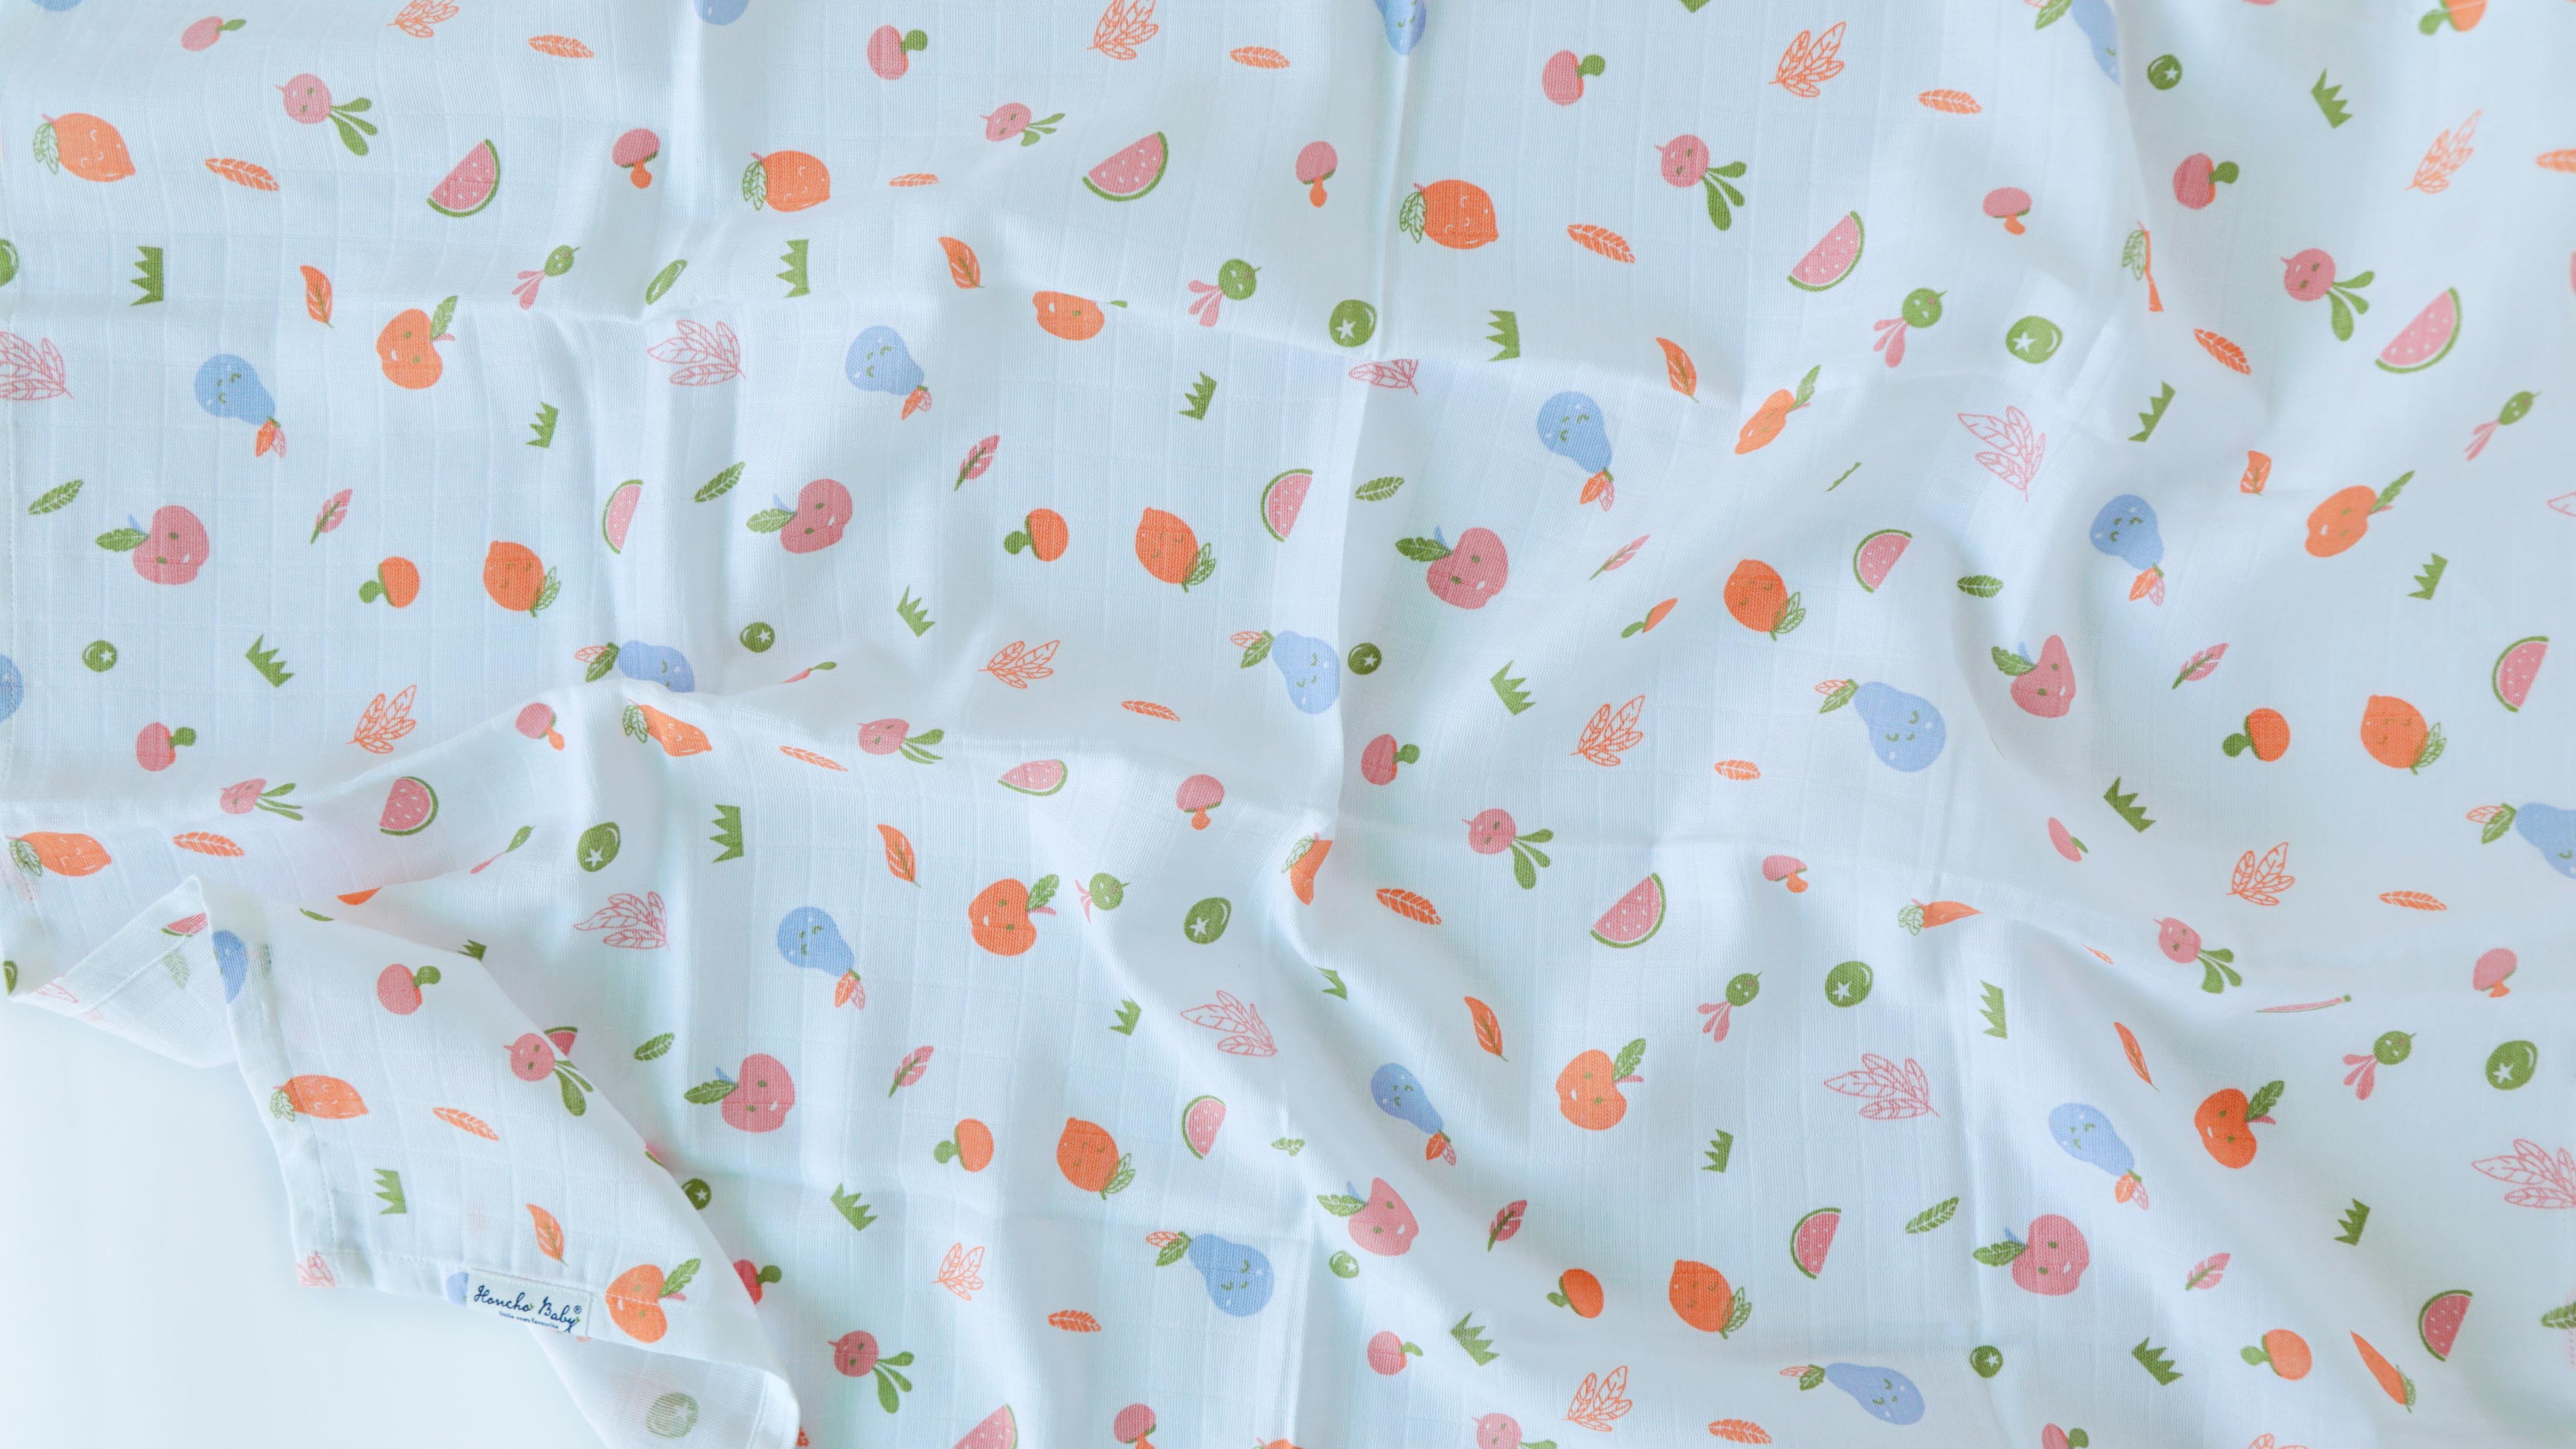 NEW Tropical Tango - Muslin 100% Cotton Baby Towel (65 X 90 cms) 1 pack